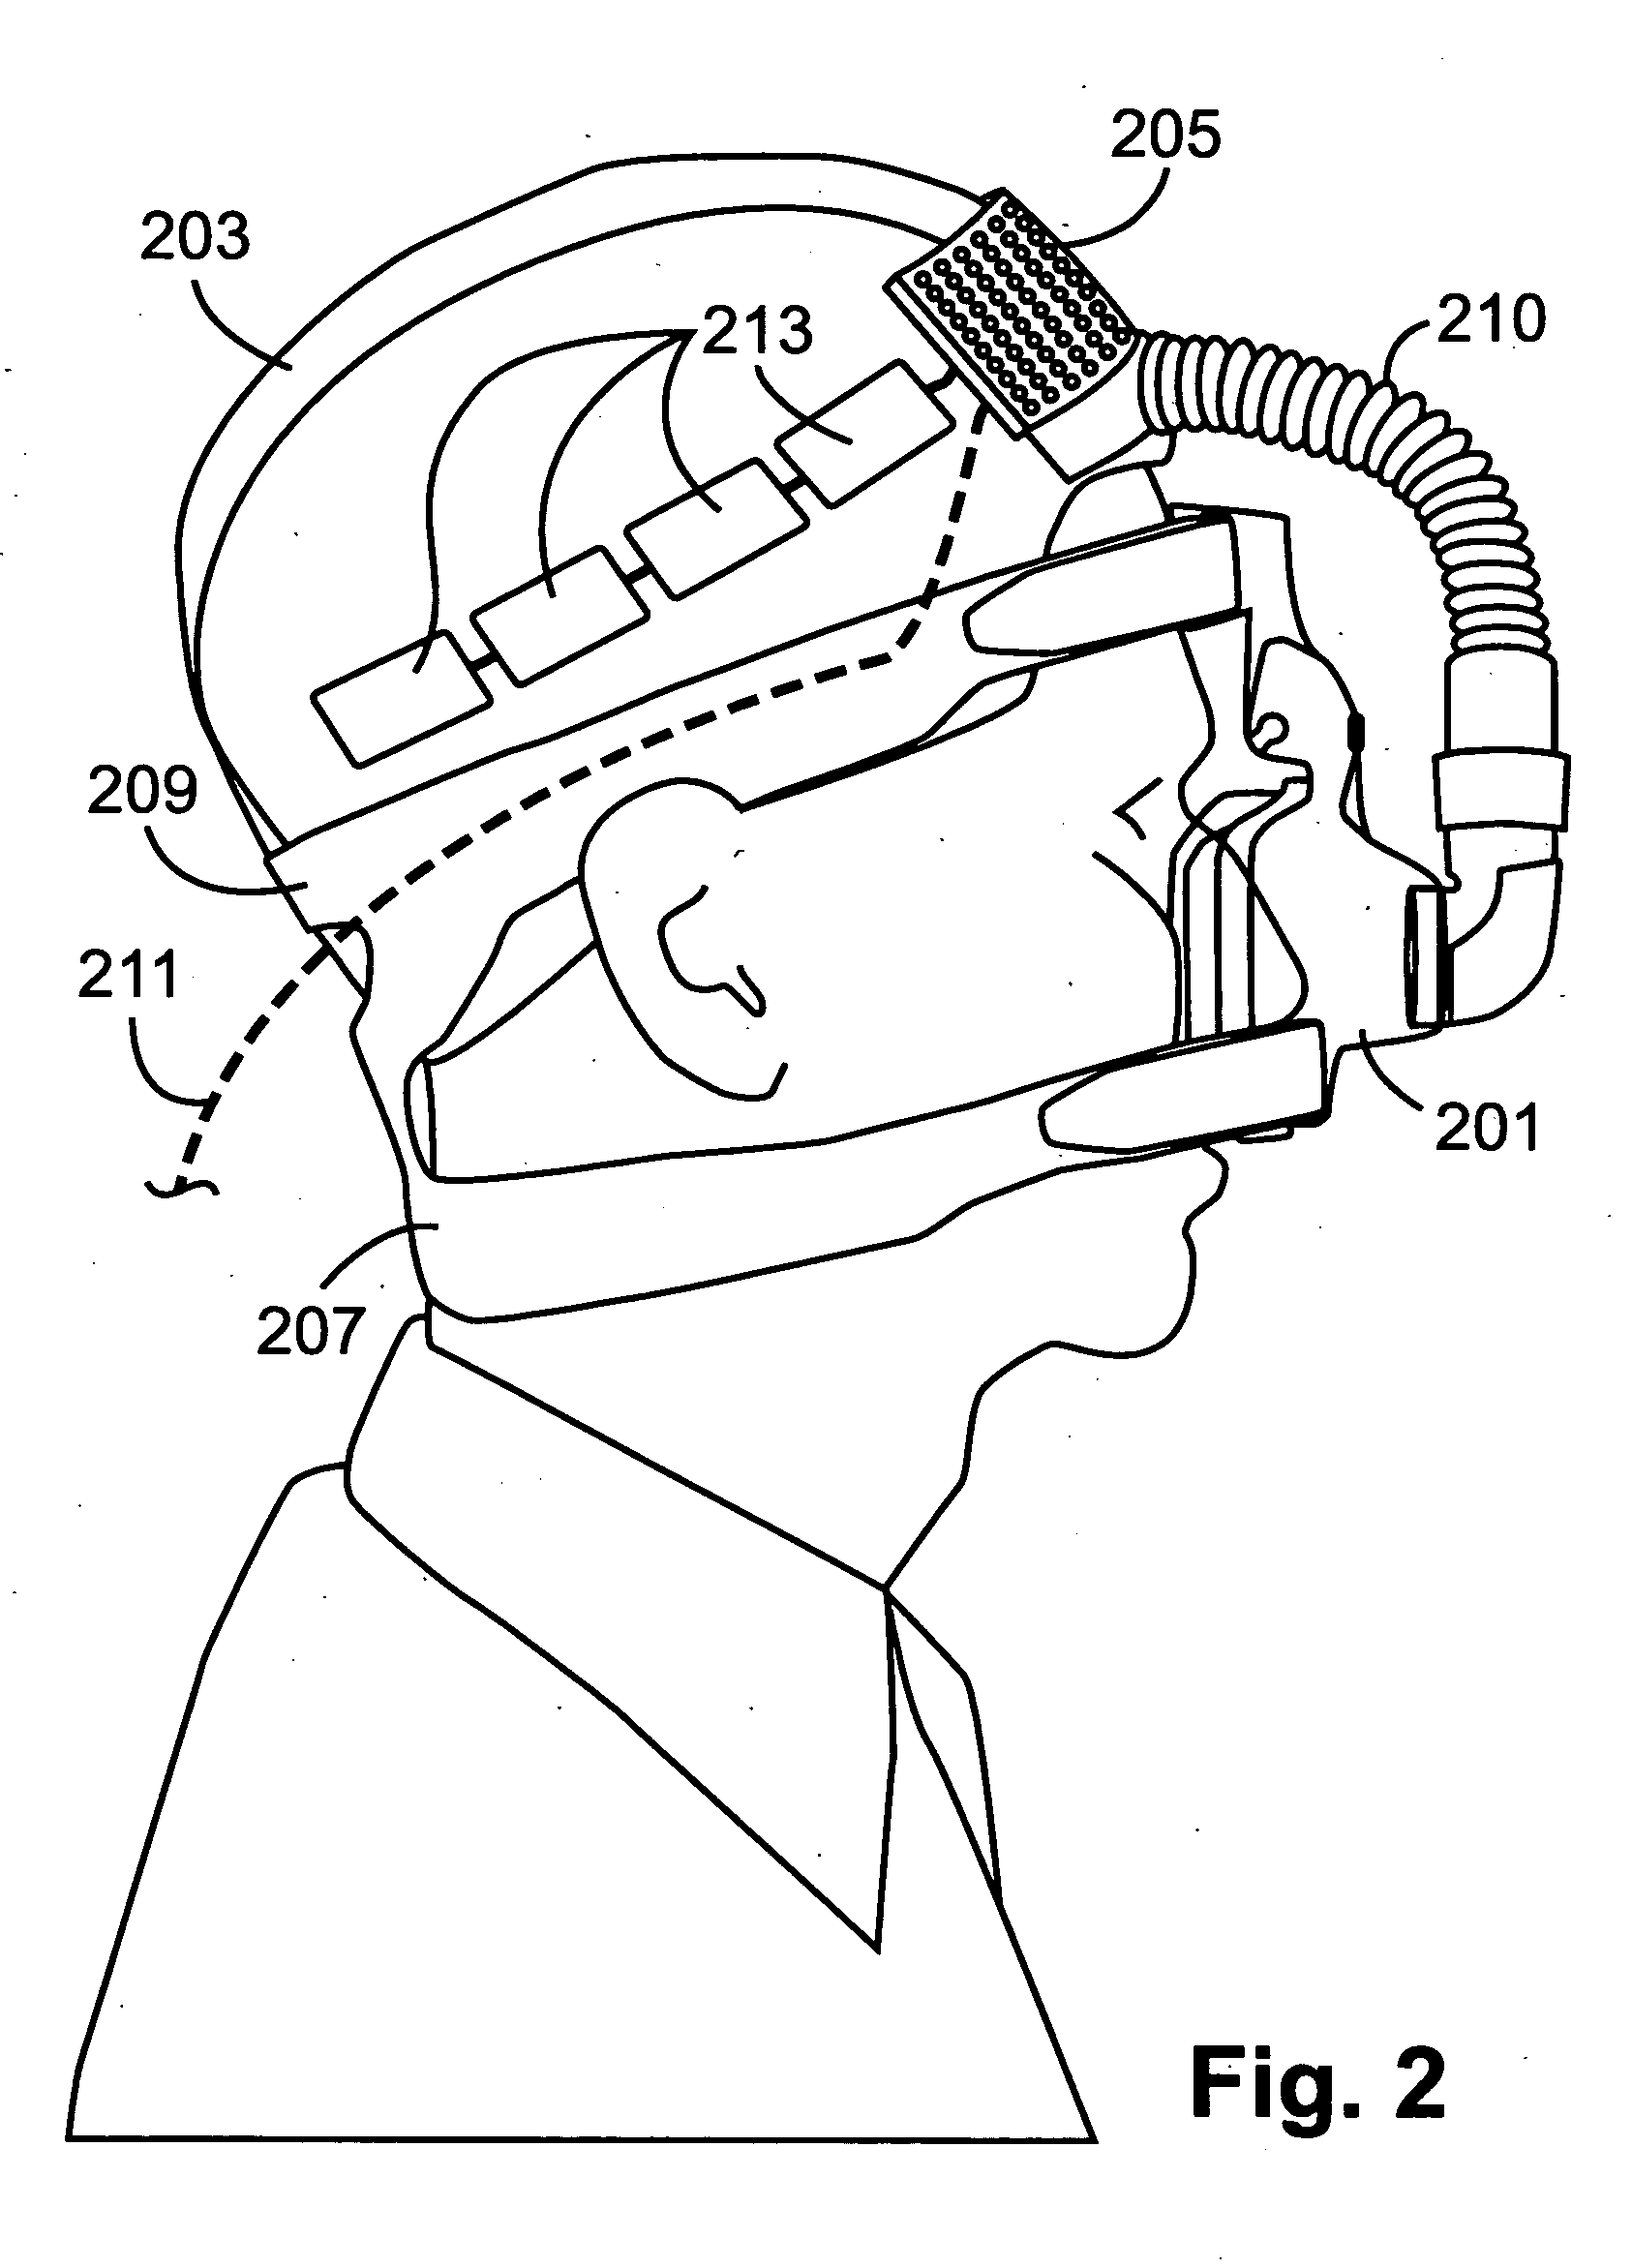 Wearable system for positive airway pressure therapy